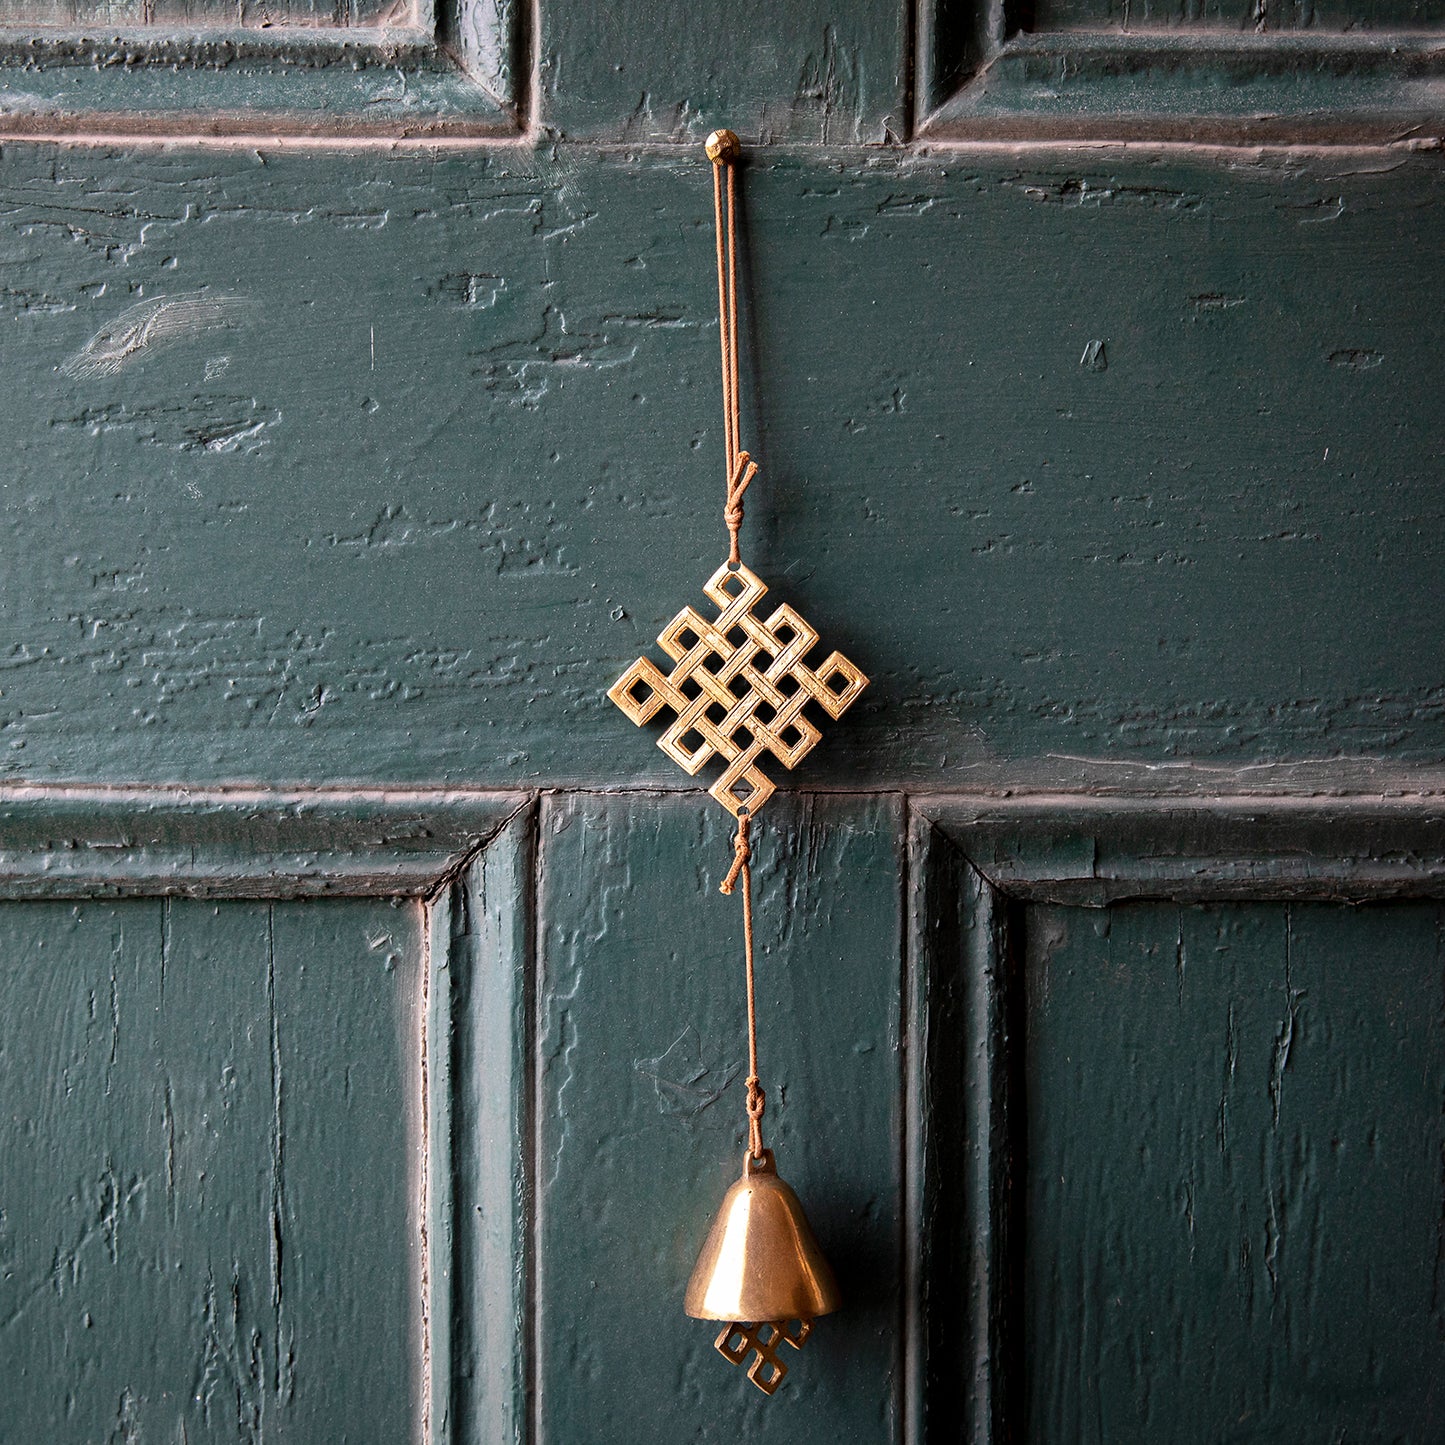 Endless Knot Door Chime